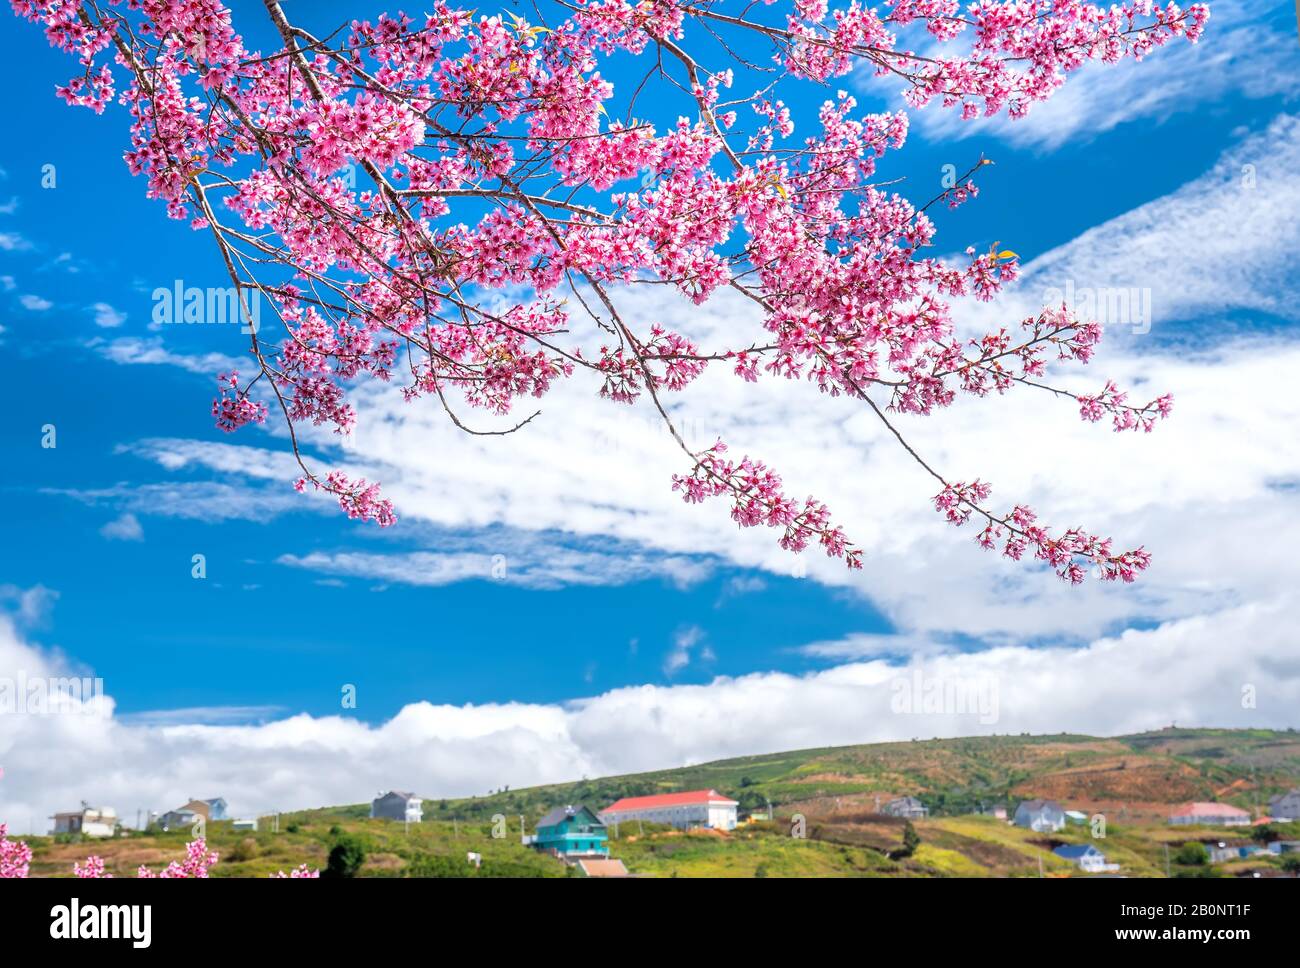 Spring flowers in the small town with cherry blossoms as the foreground decorate the spring air in the Da Lat plateau, Vietnam Stock Photo